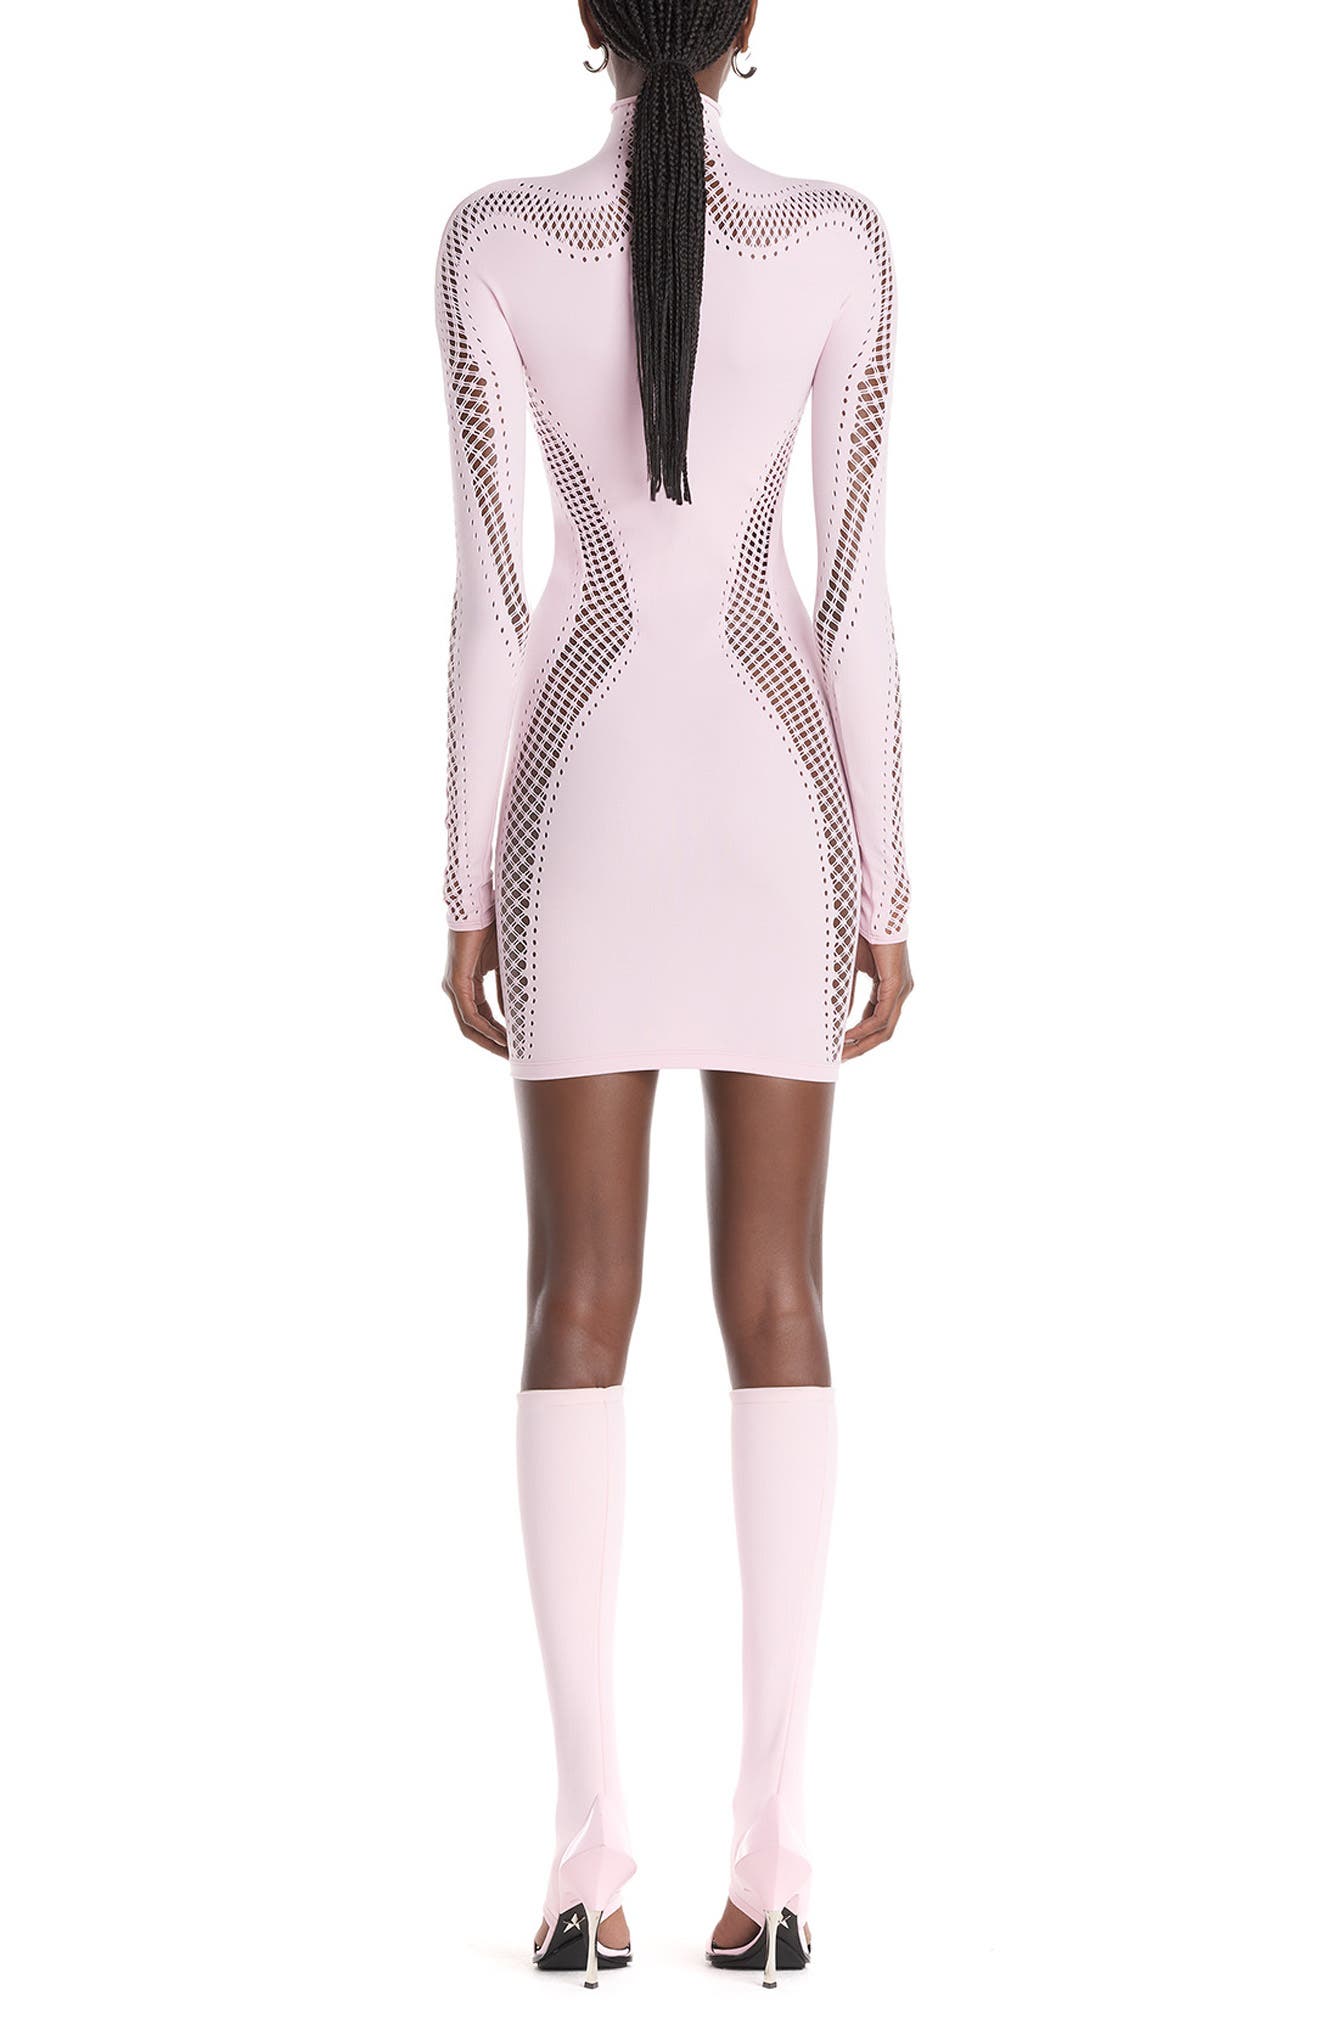 Thierry Mugler - Leggings with mesh inserts and cuffs